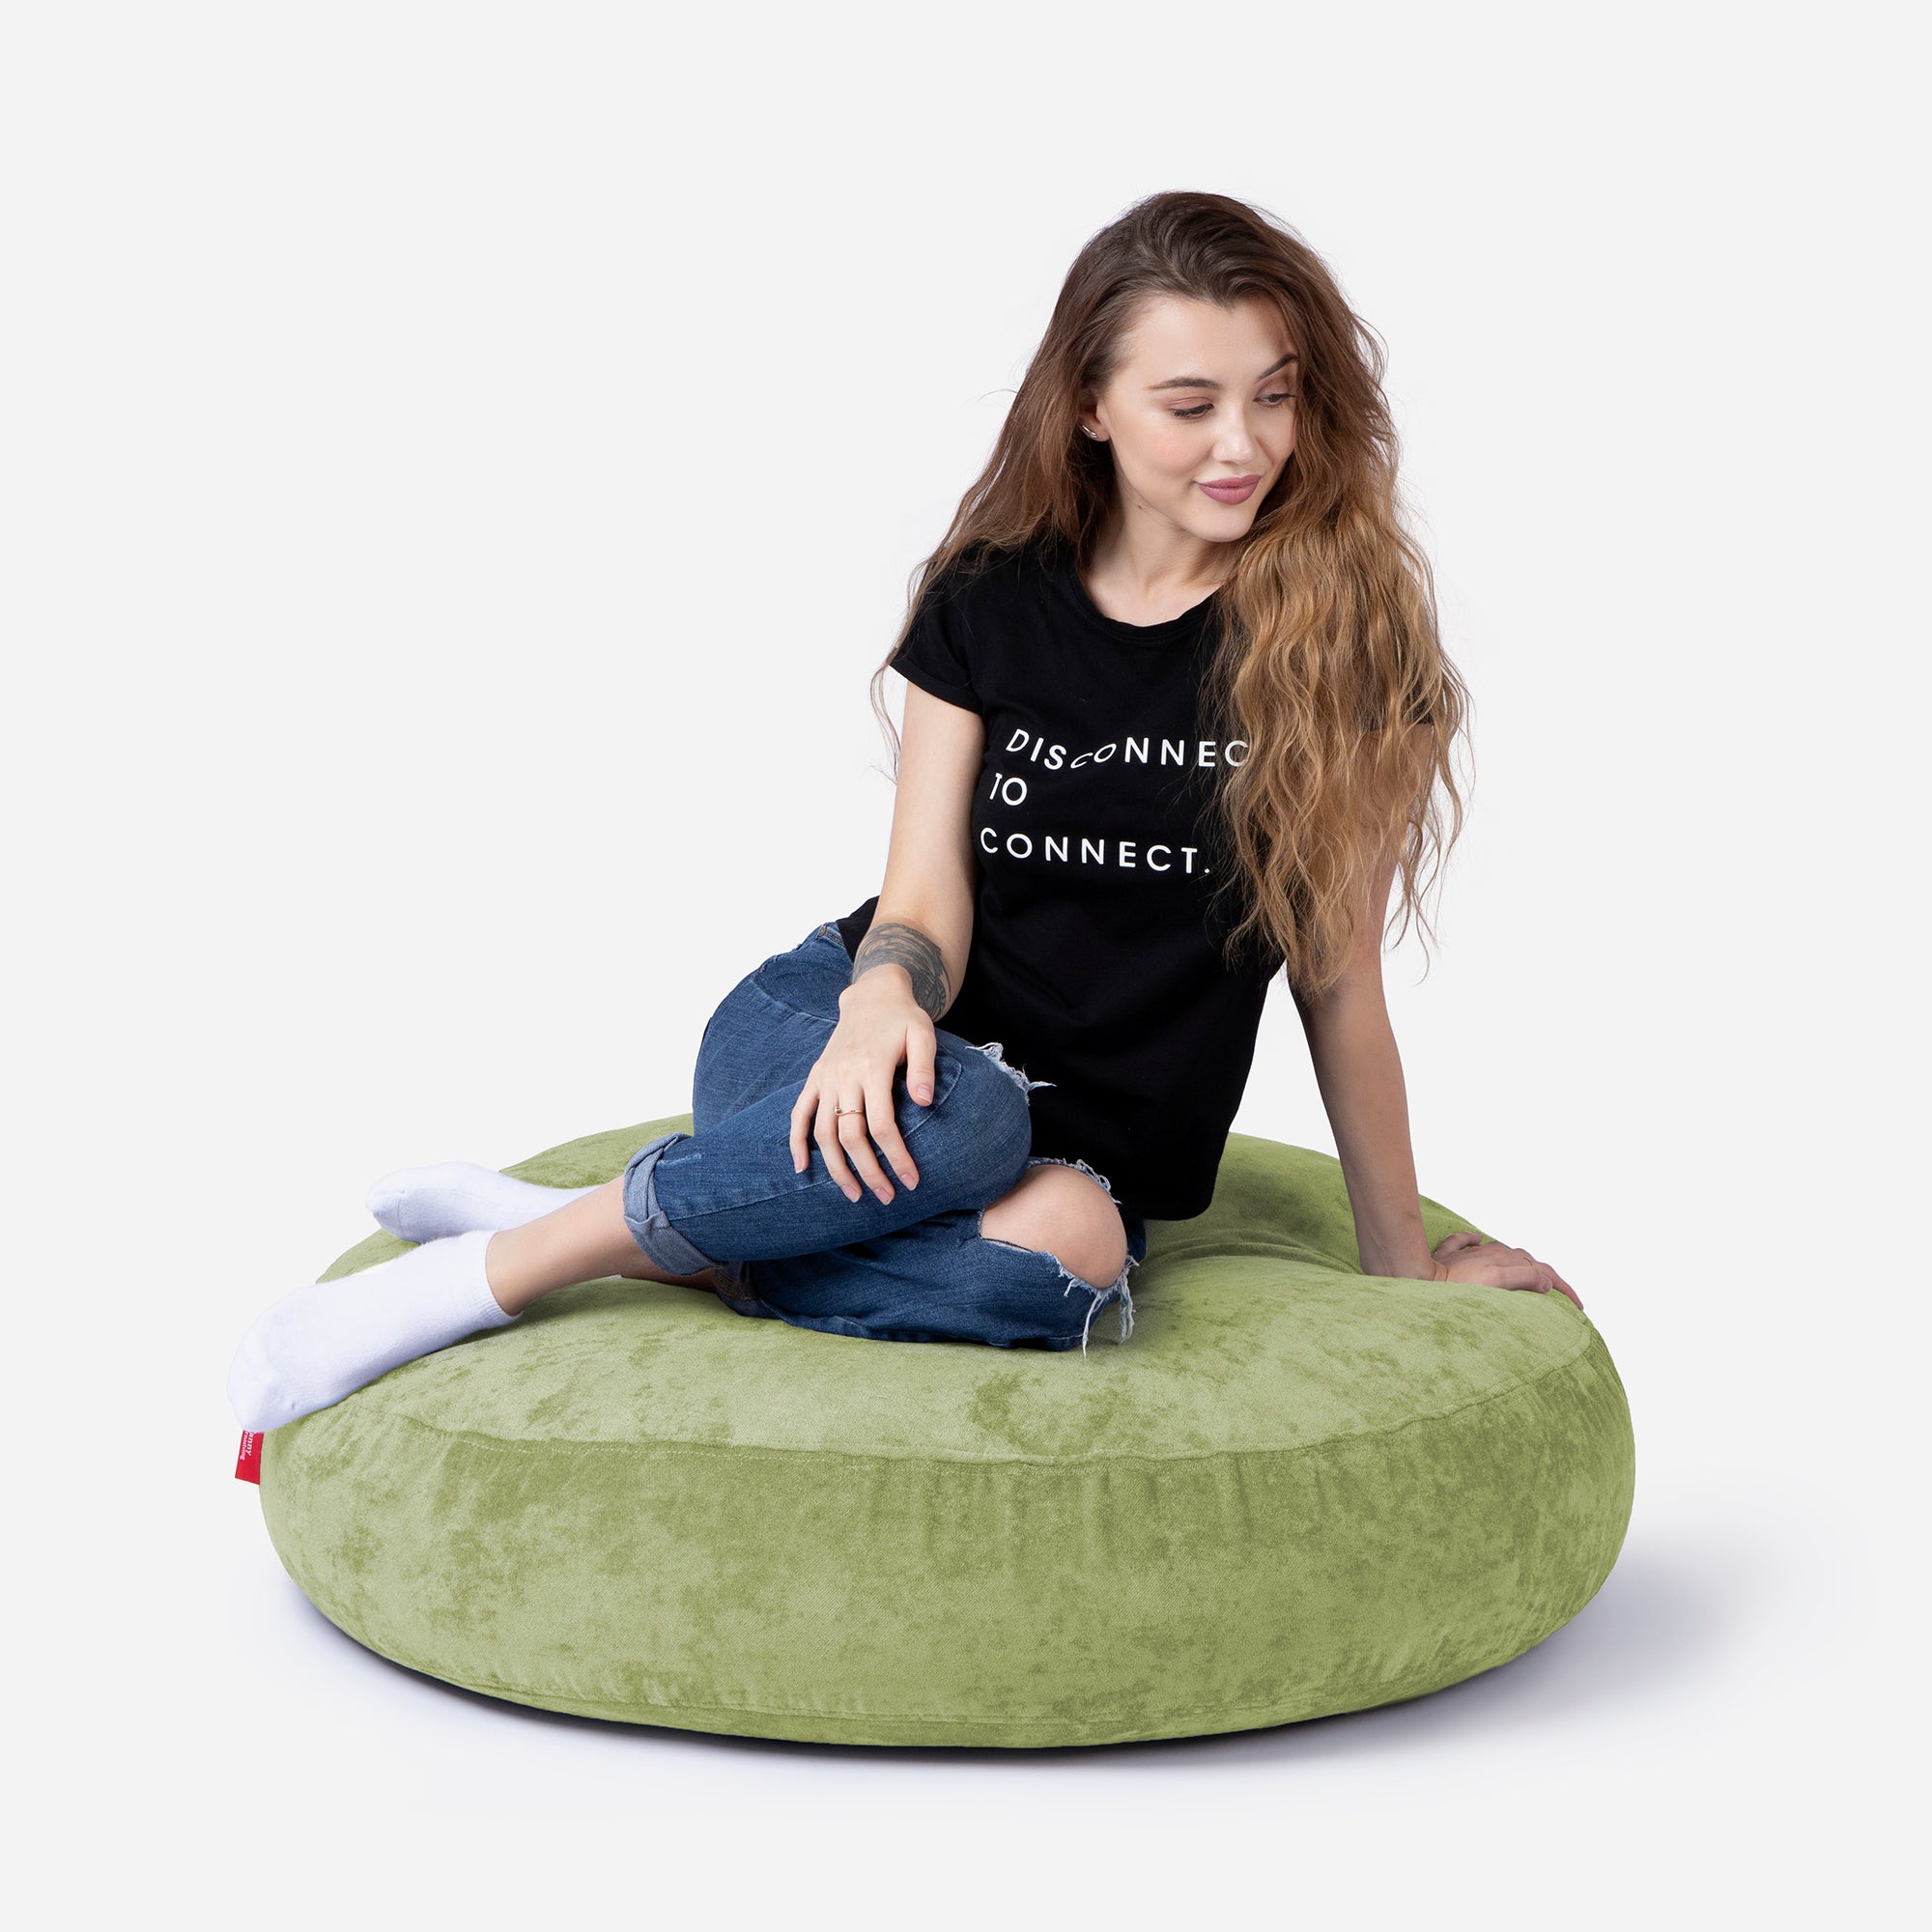 Pouf, Ottoman Lime color by Lanny with girl seating on it 